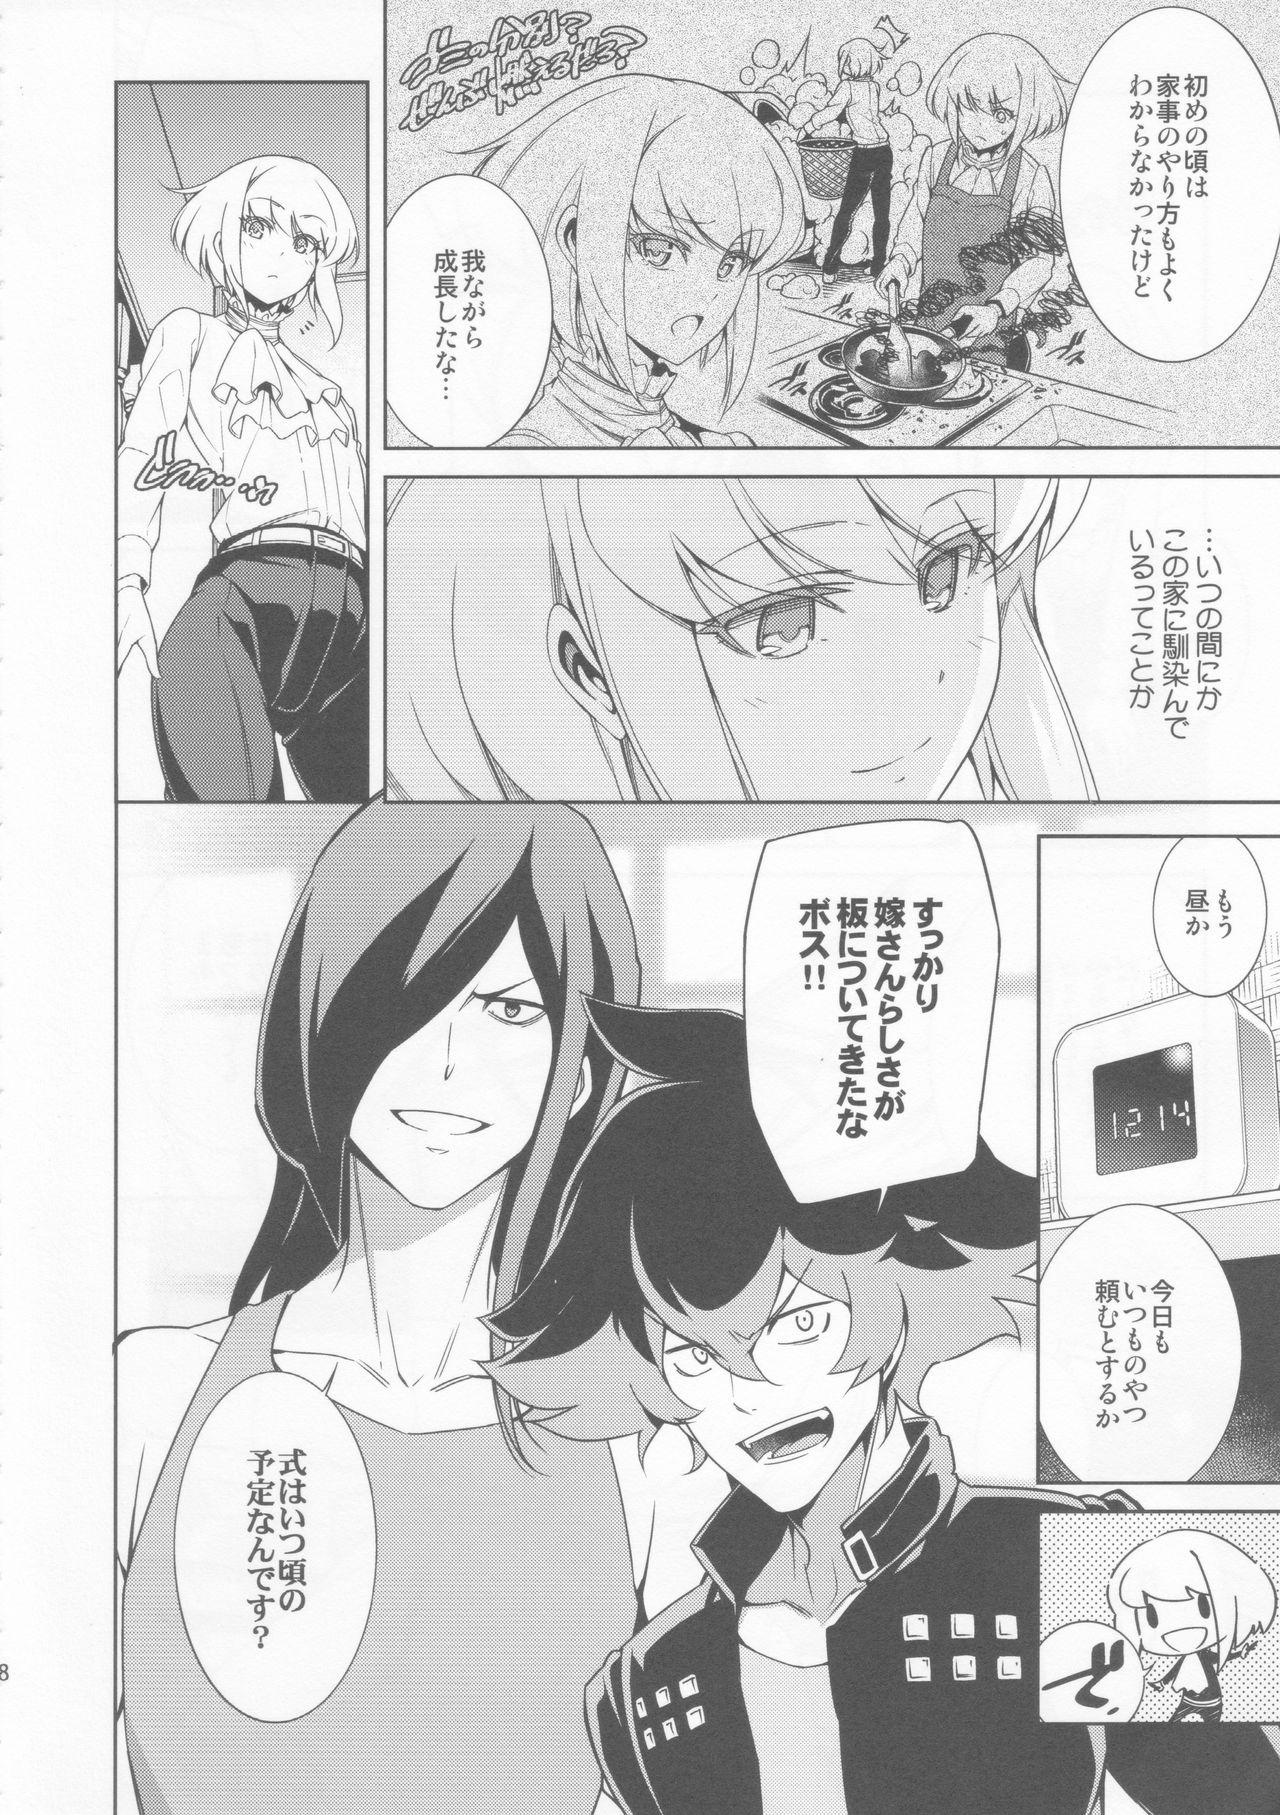 Brunettes PROMISED PROPOSE - Promare Sologirl - Page 7